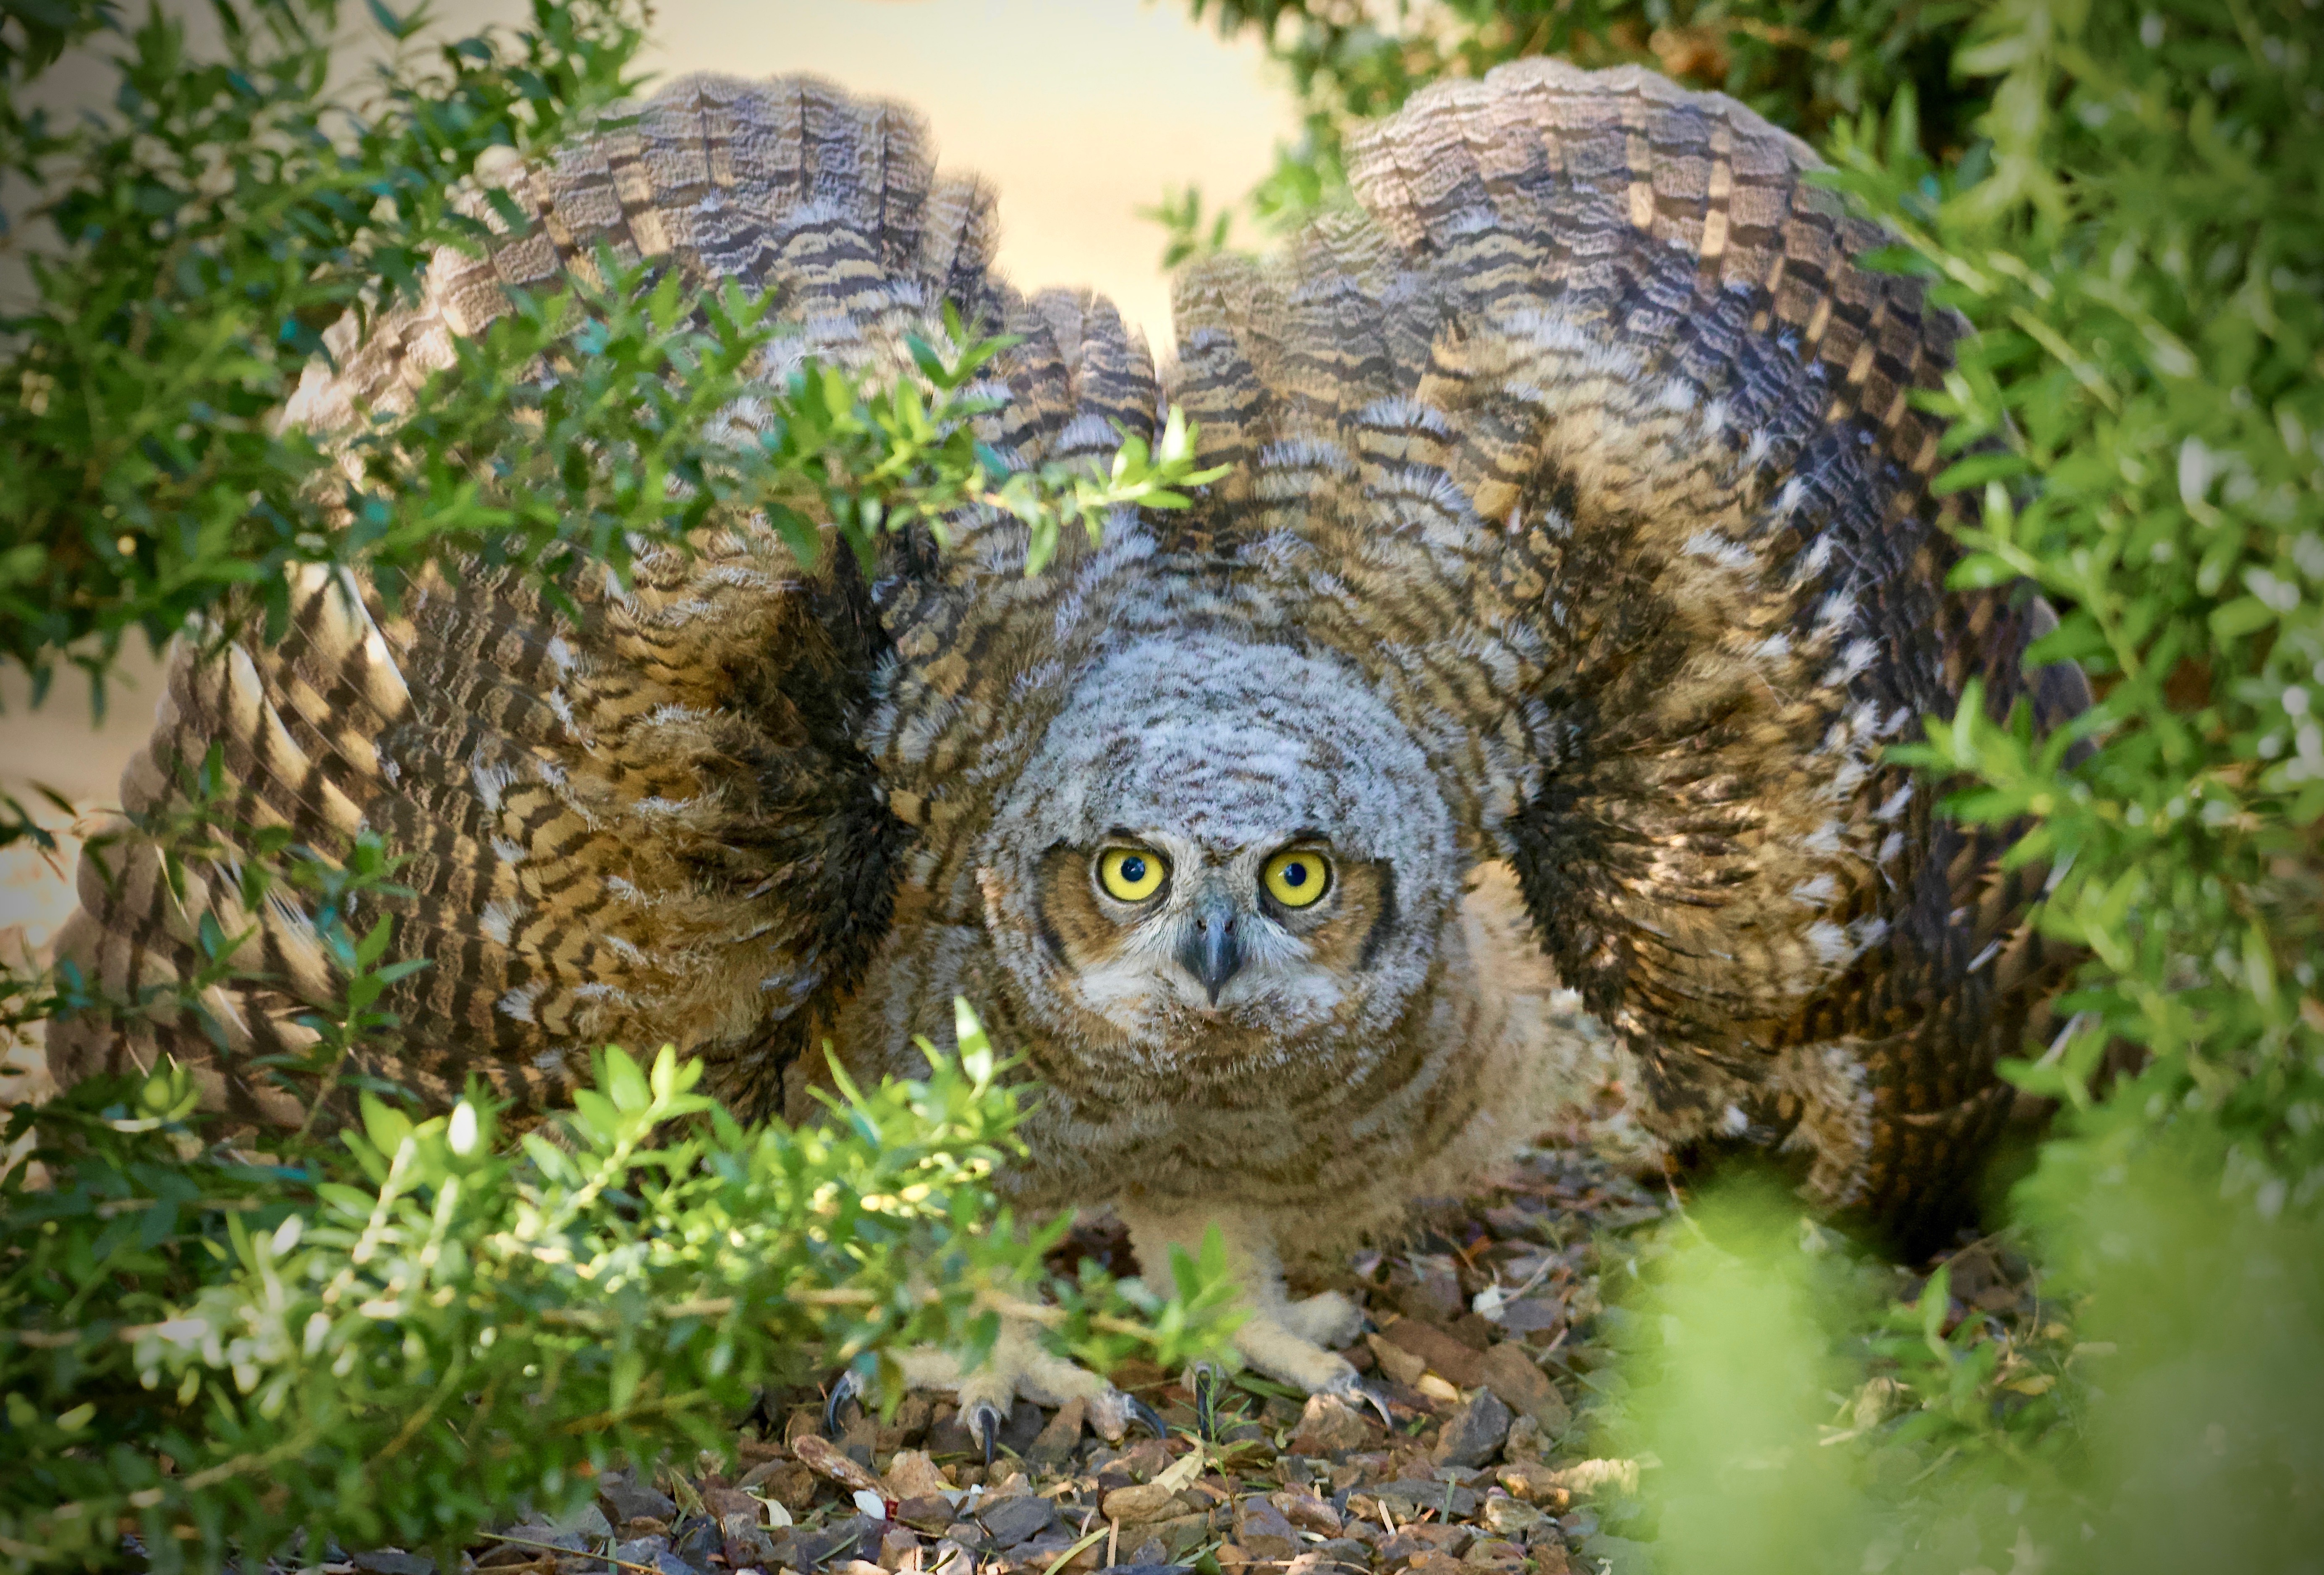 Photo by Mark Koster  |  I was as surprised as this Great Horned Owlet while searching for "Owl Pellets" near the nest !